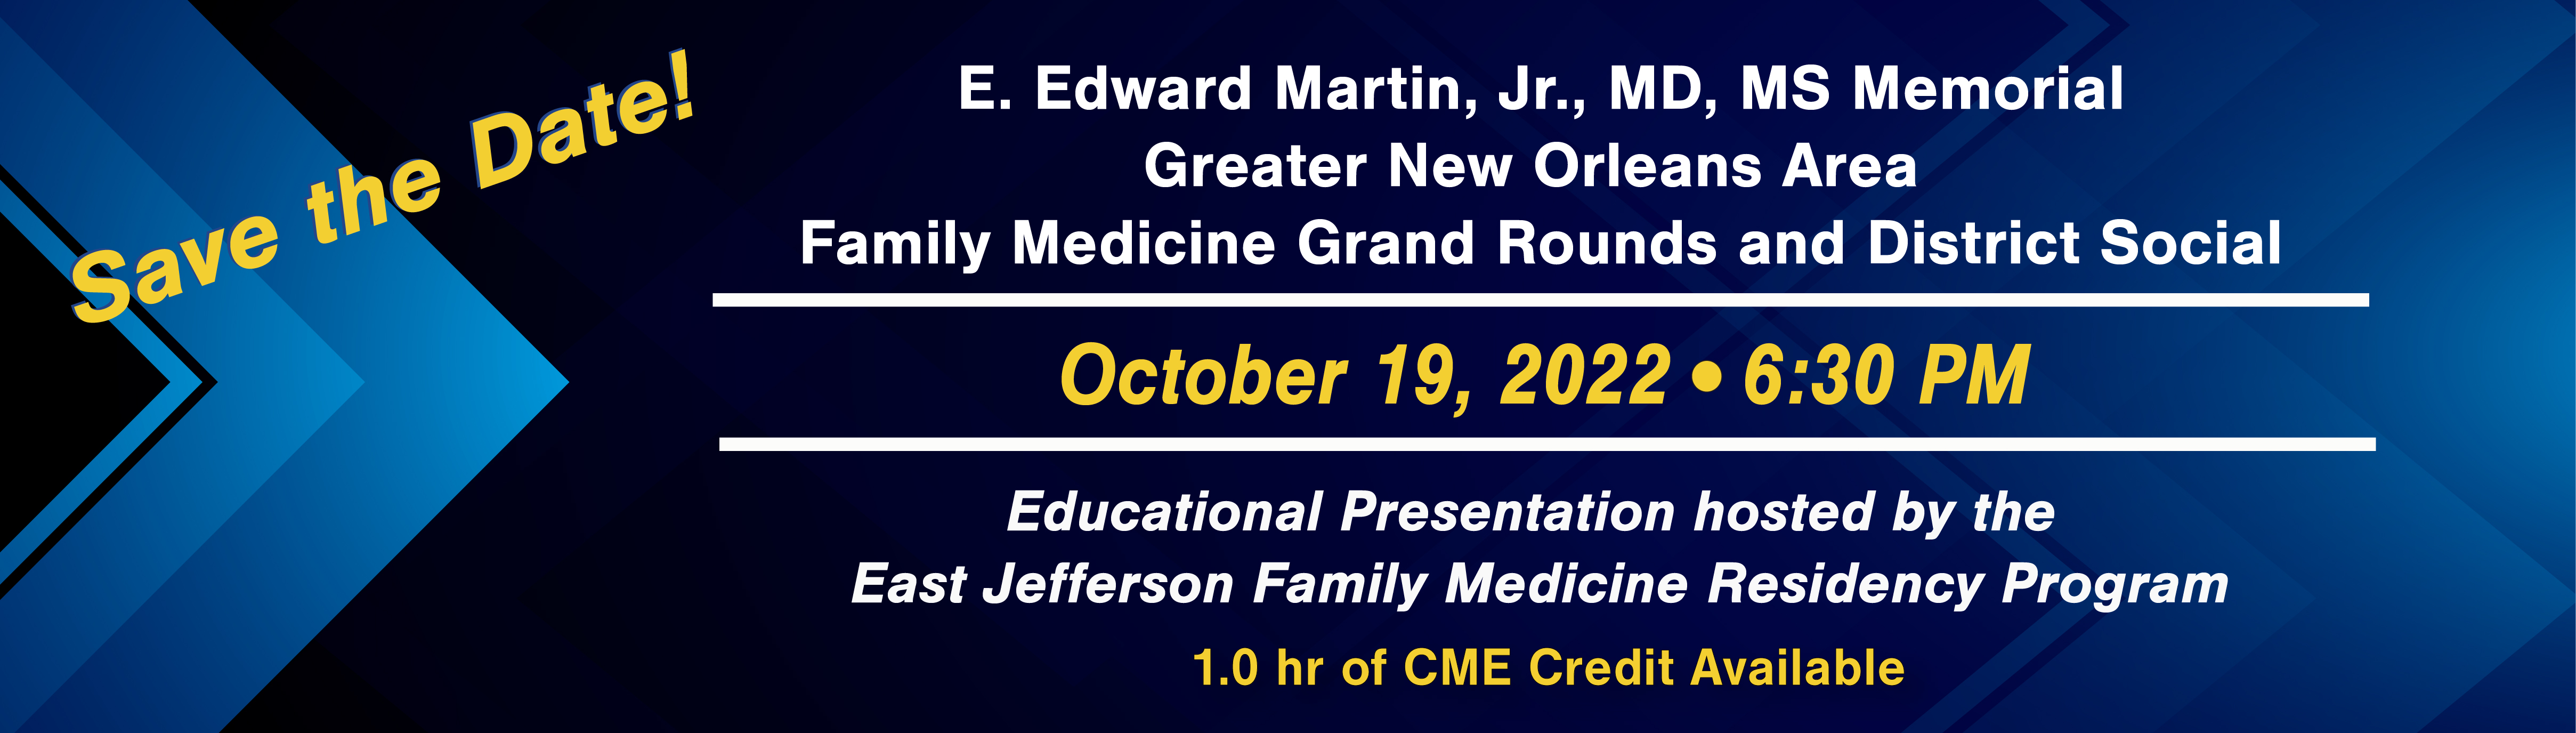 Grand Rounds web banner Save the Date